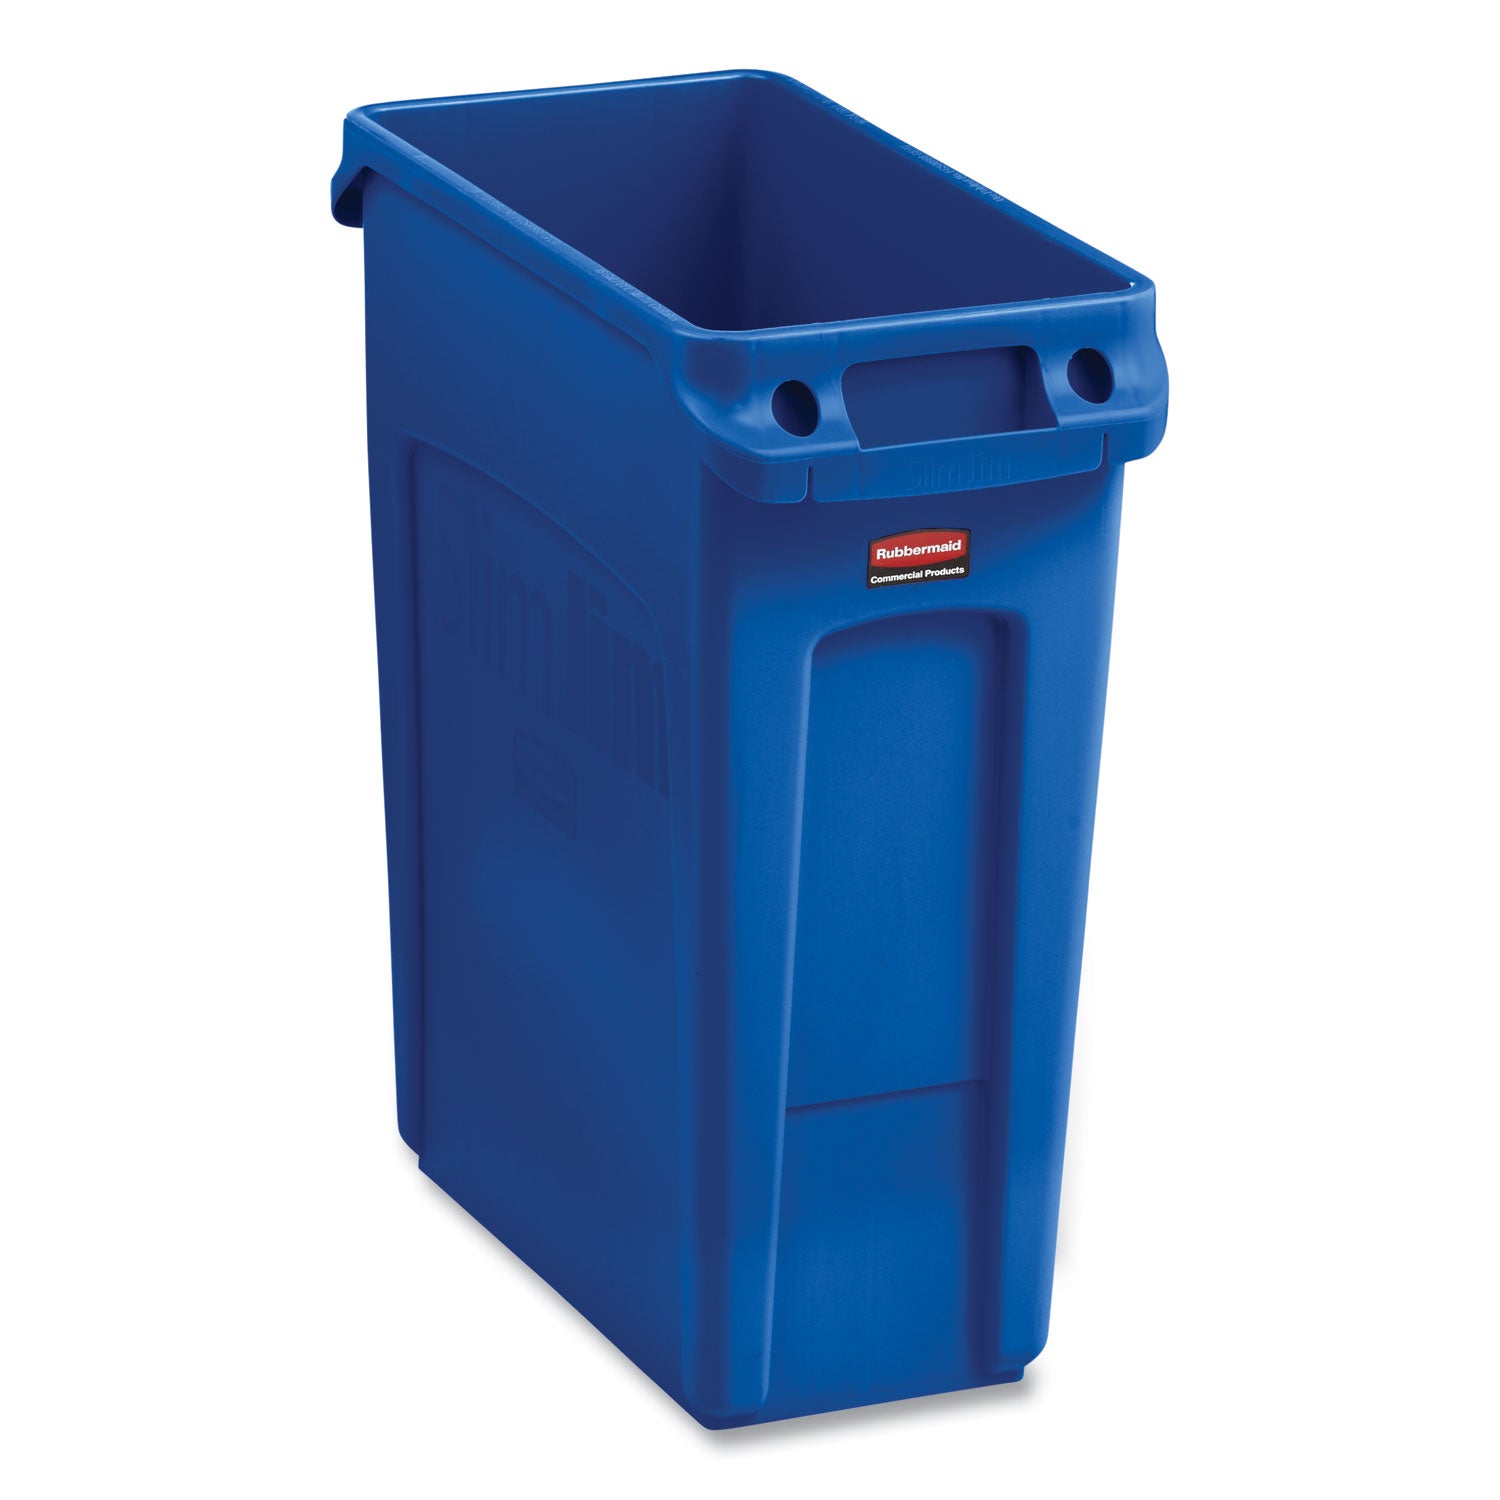 Rubbermaid Commercial Slim Jim Vented Container - 16 gal Capacity - Rectangular - Durable, Vented, Sturdy, Weather Resistant, Handle, Lightweight - 25" Height x 11" Width - Plastic - Blue - 4 / Carton - 1